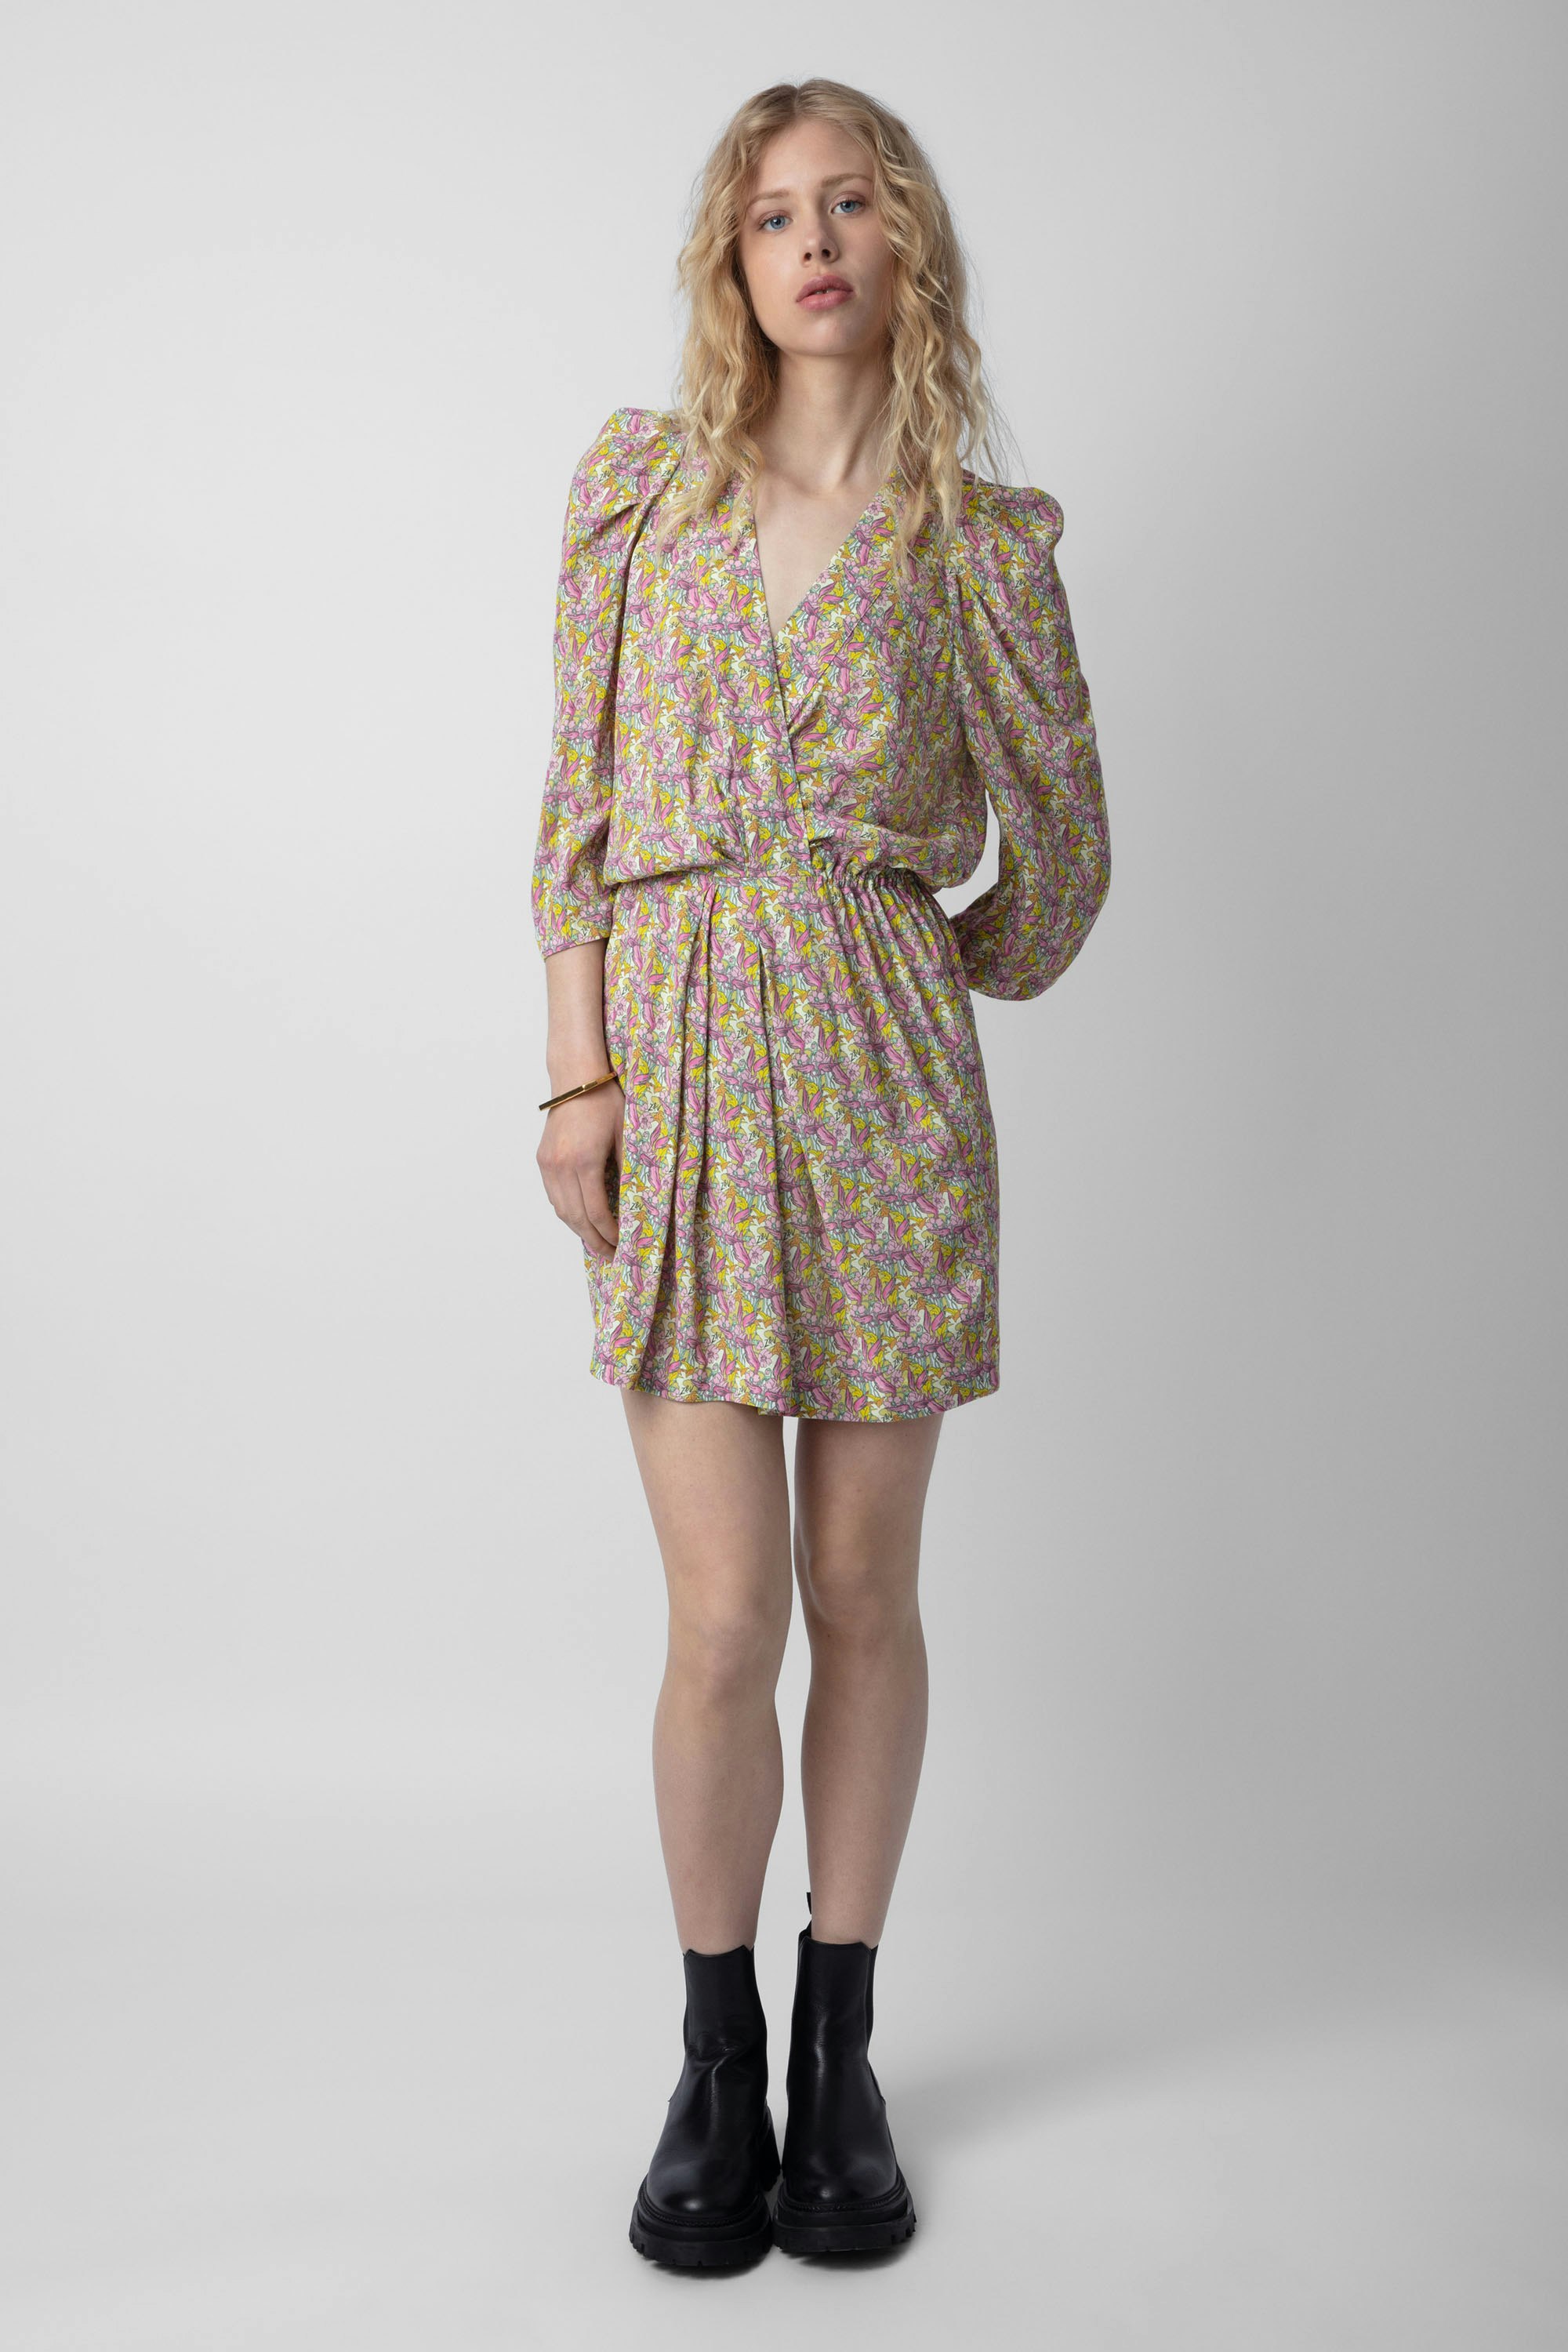 Ruz Dress - Women's yellow crepe short dress featuring liberty print, wings and gathered details.